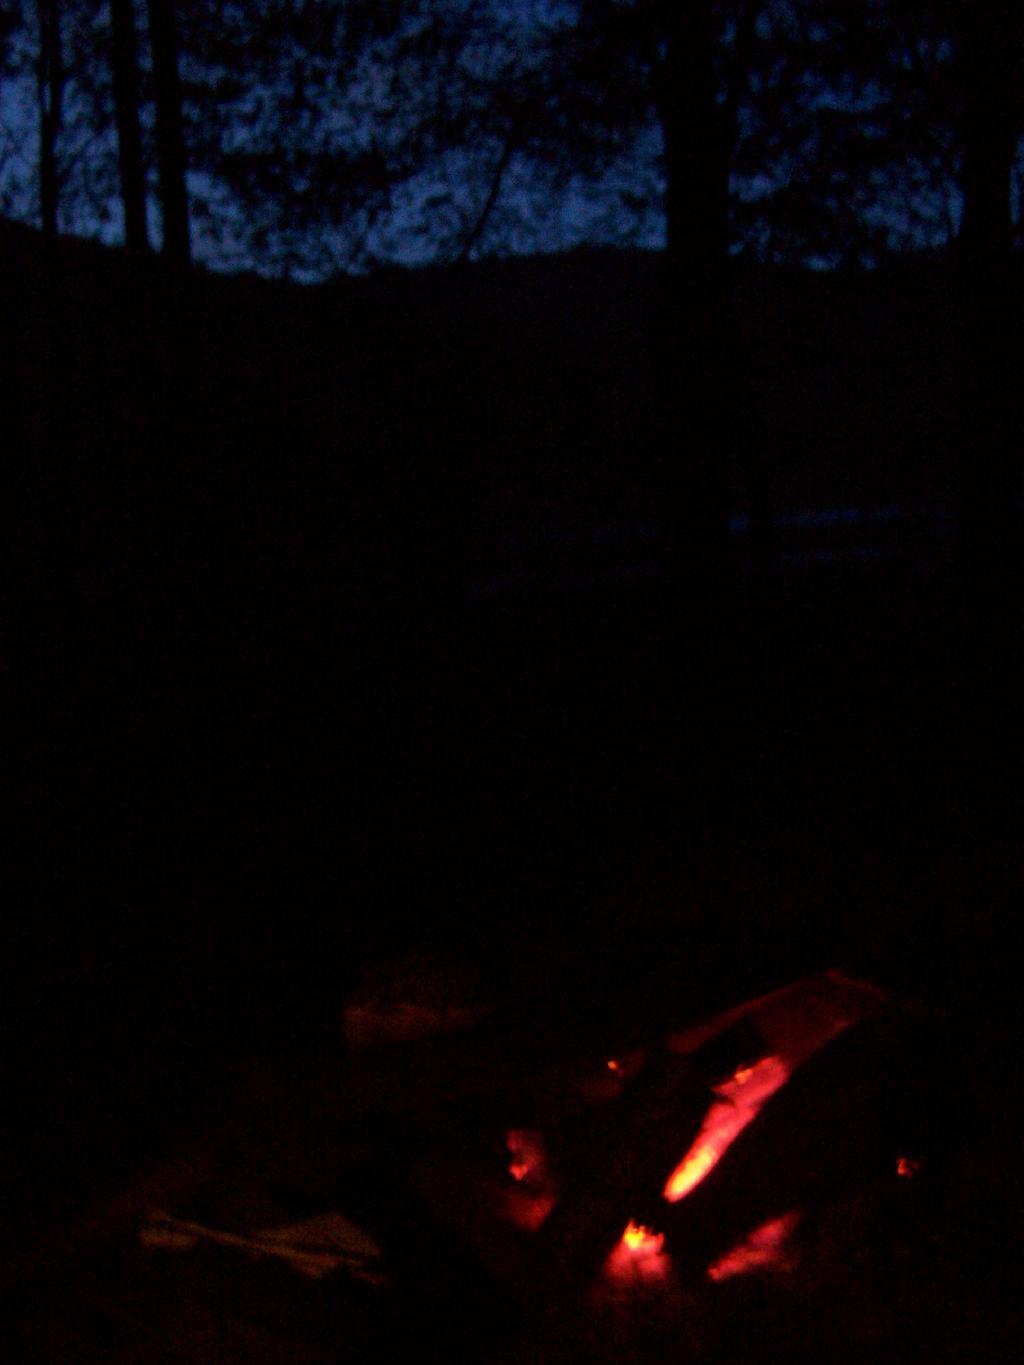 Watching the Campfire Burn in the The Evening